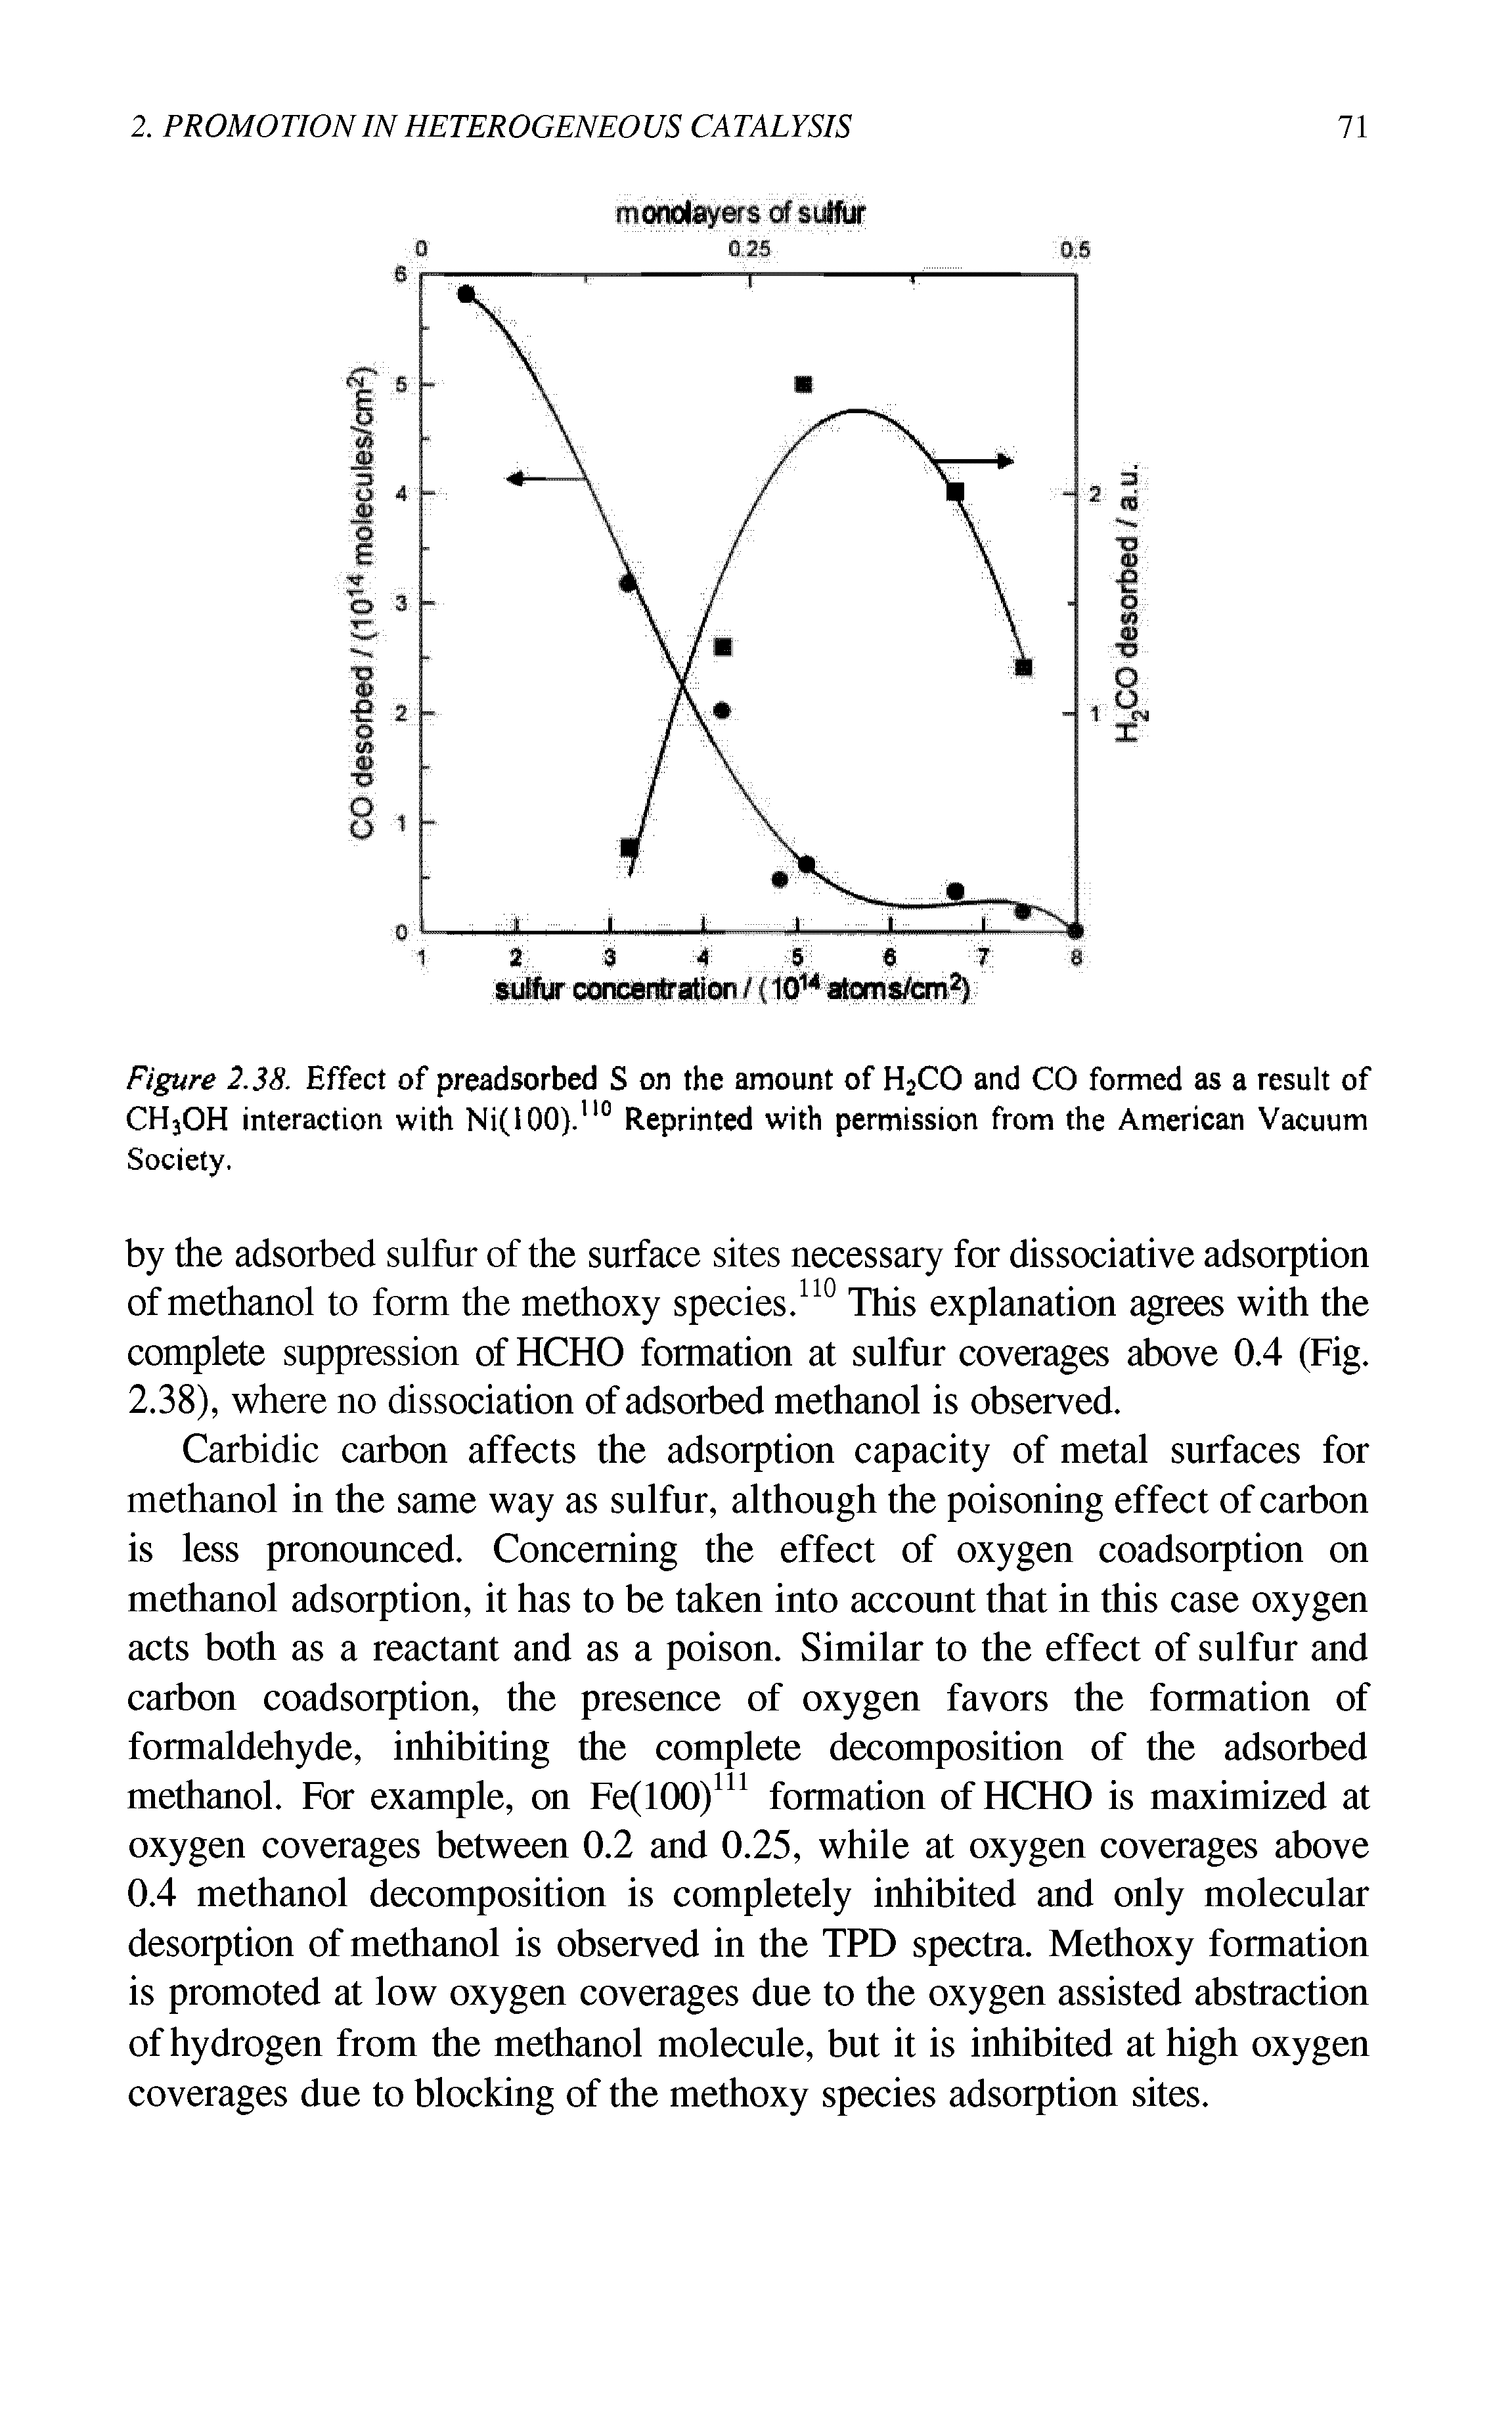 Figure 2.38. Effect of preadsorbed S on the amount of H2CO and CO formed as a result of CH3OH interaction with Ni(lOO).110 Reprinted with permission from the American Vacuum Society.